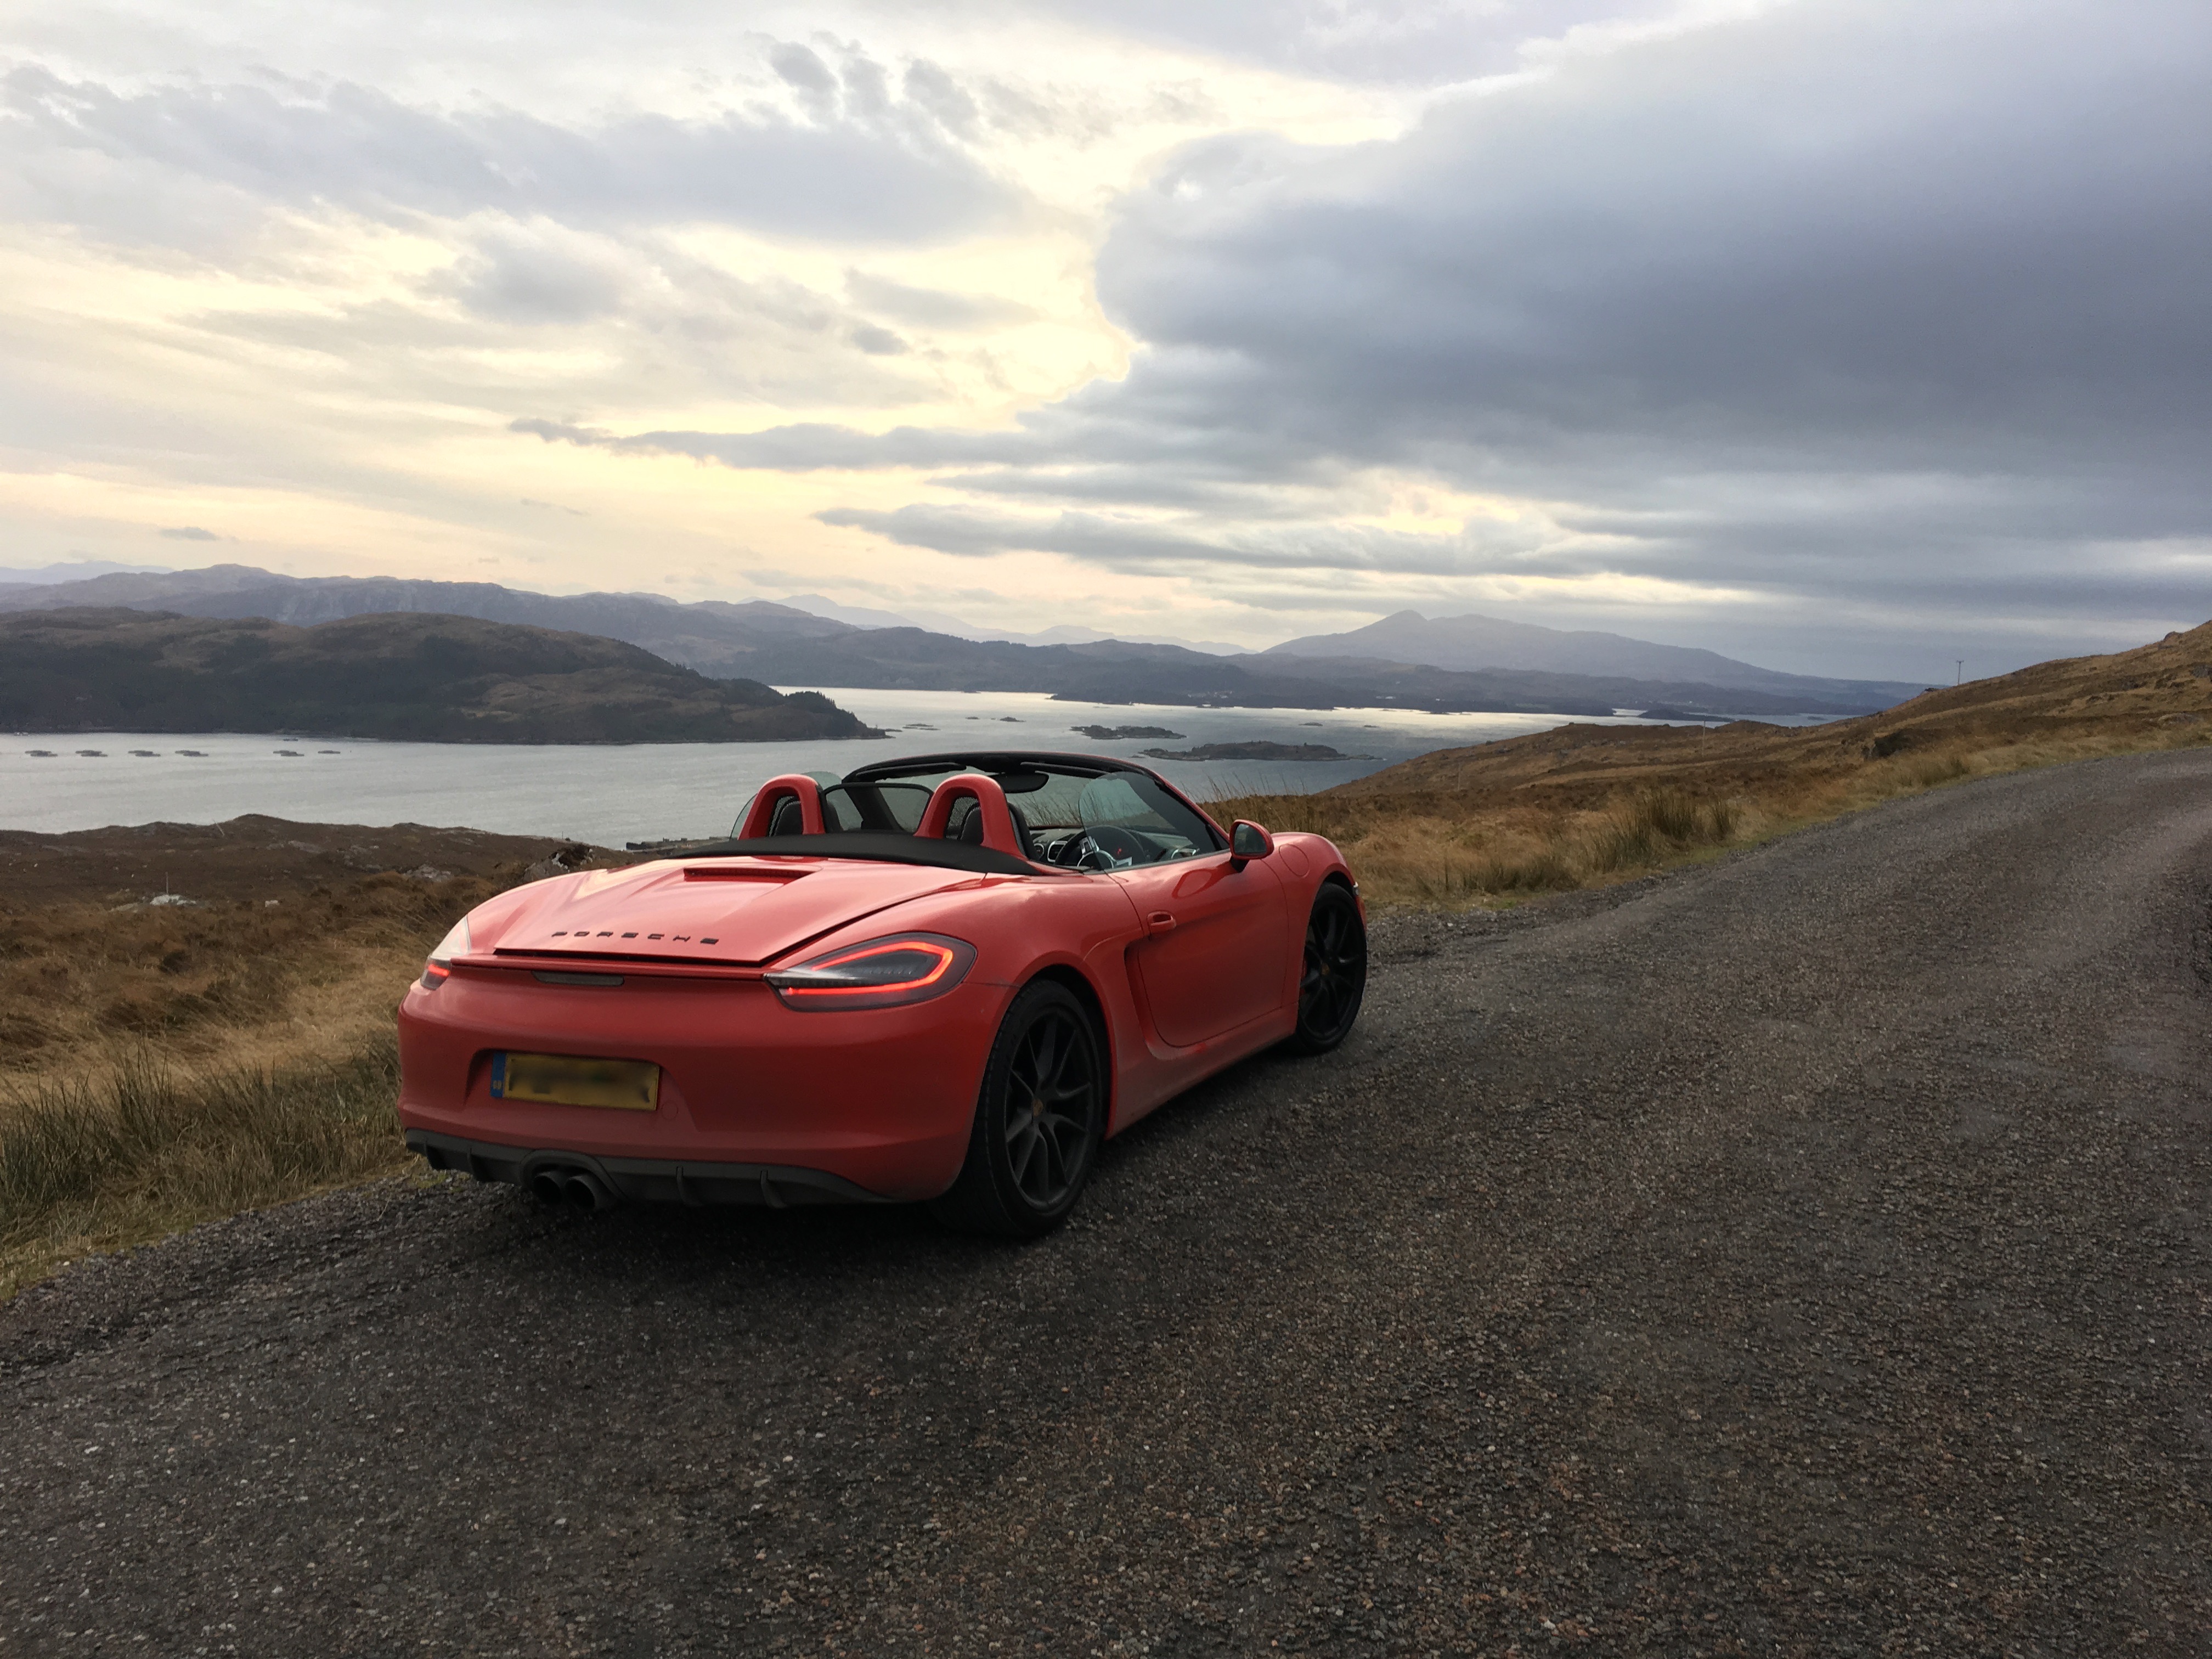 Top 10 Driving Roads in the UK? - Page 10 - Roads - PistonHeads